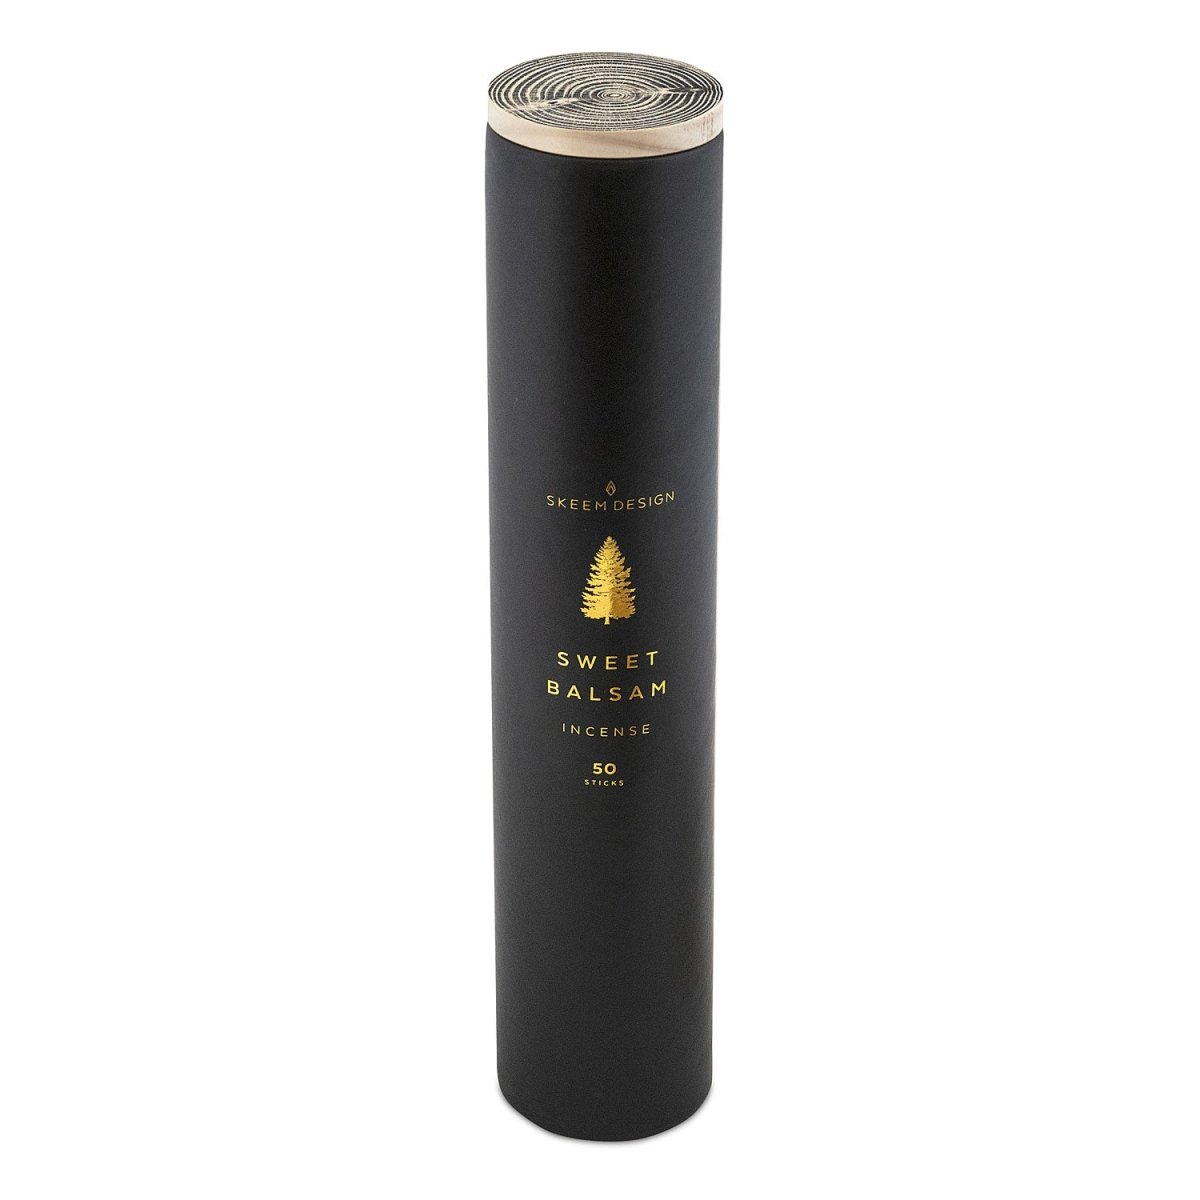 Black cylindrical packaging with a gold tree design. Contains fifty incense sticks in the scent sweet balsam. Made in Philadelphia, PA by SKEEM Design.